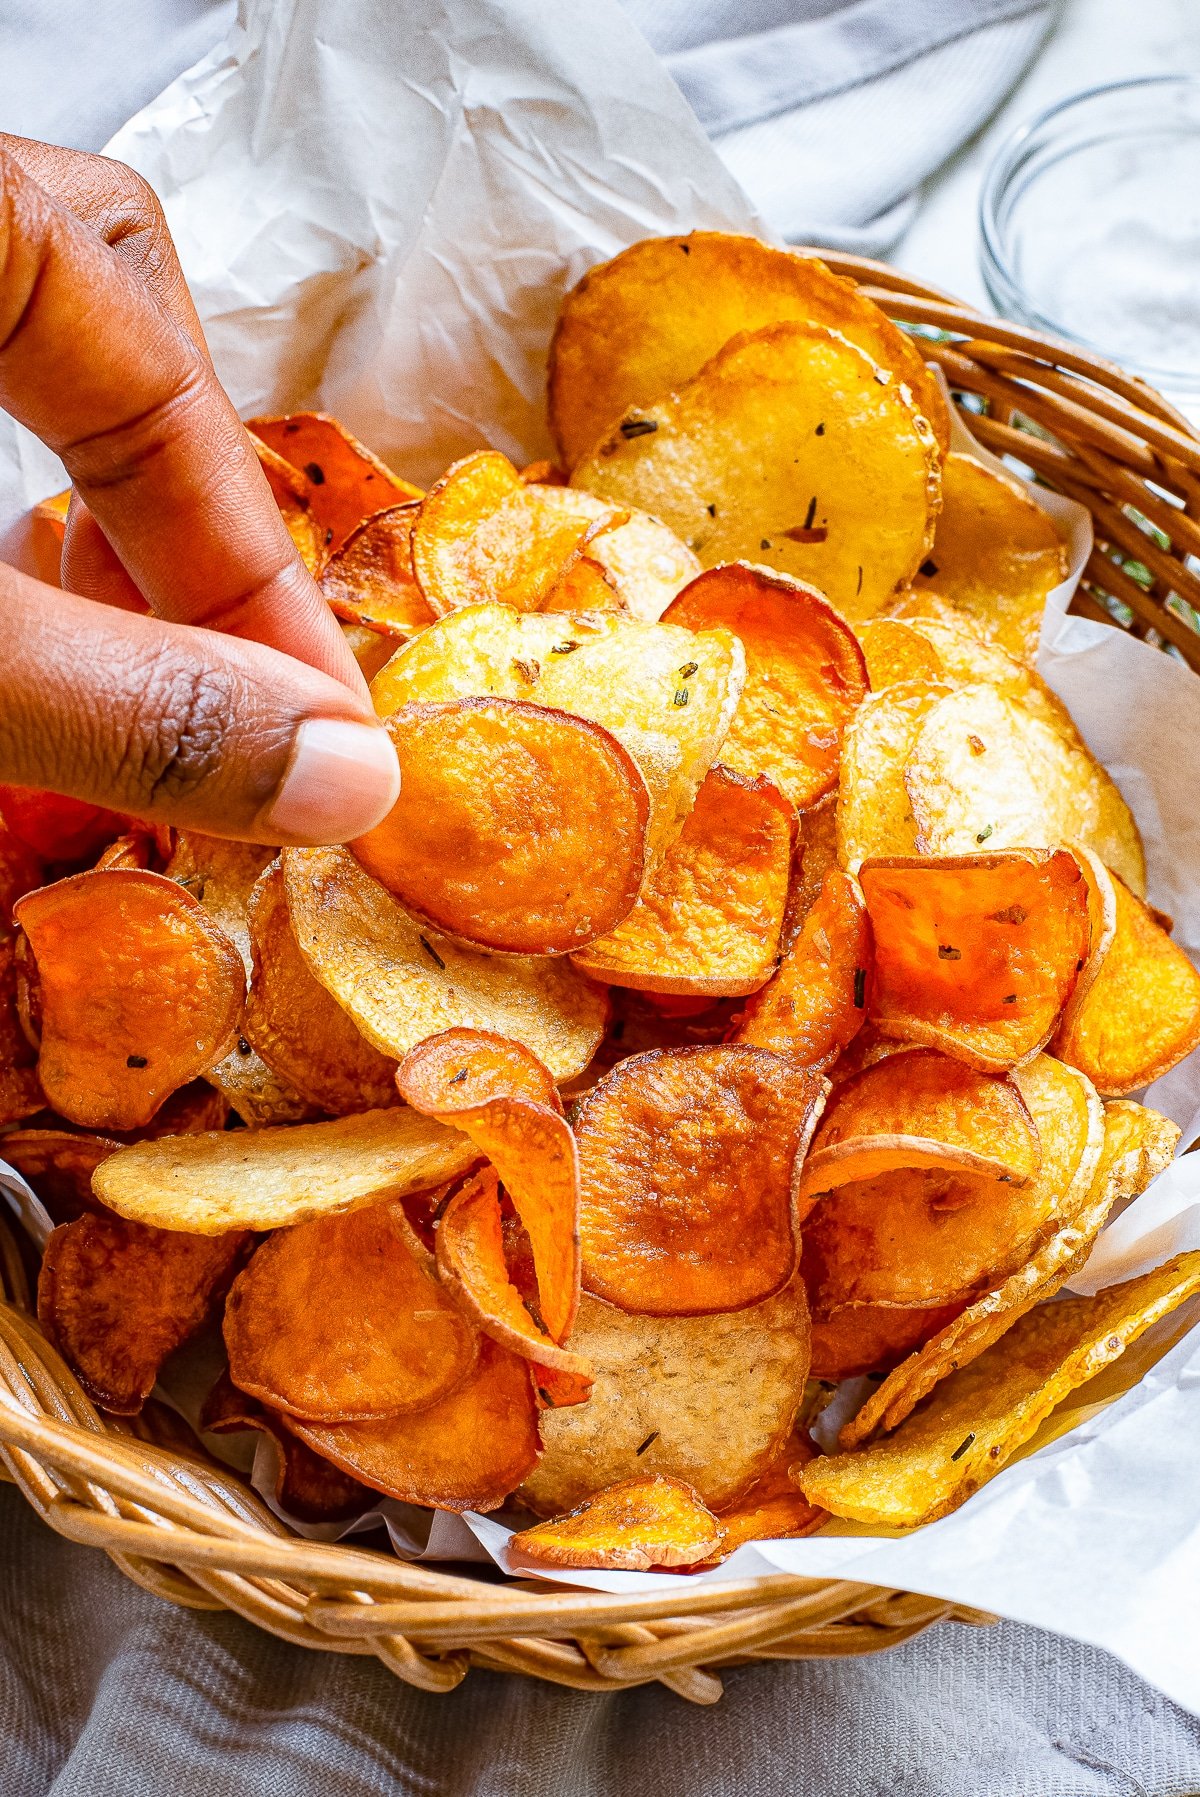 Baked potato chips in a wooden bowl with parchment paper and a hand grabbing one.